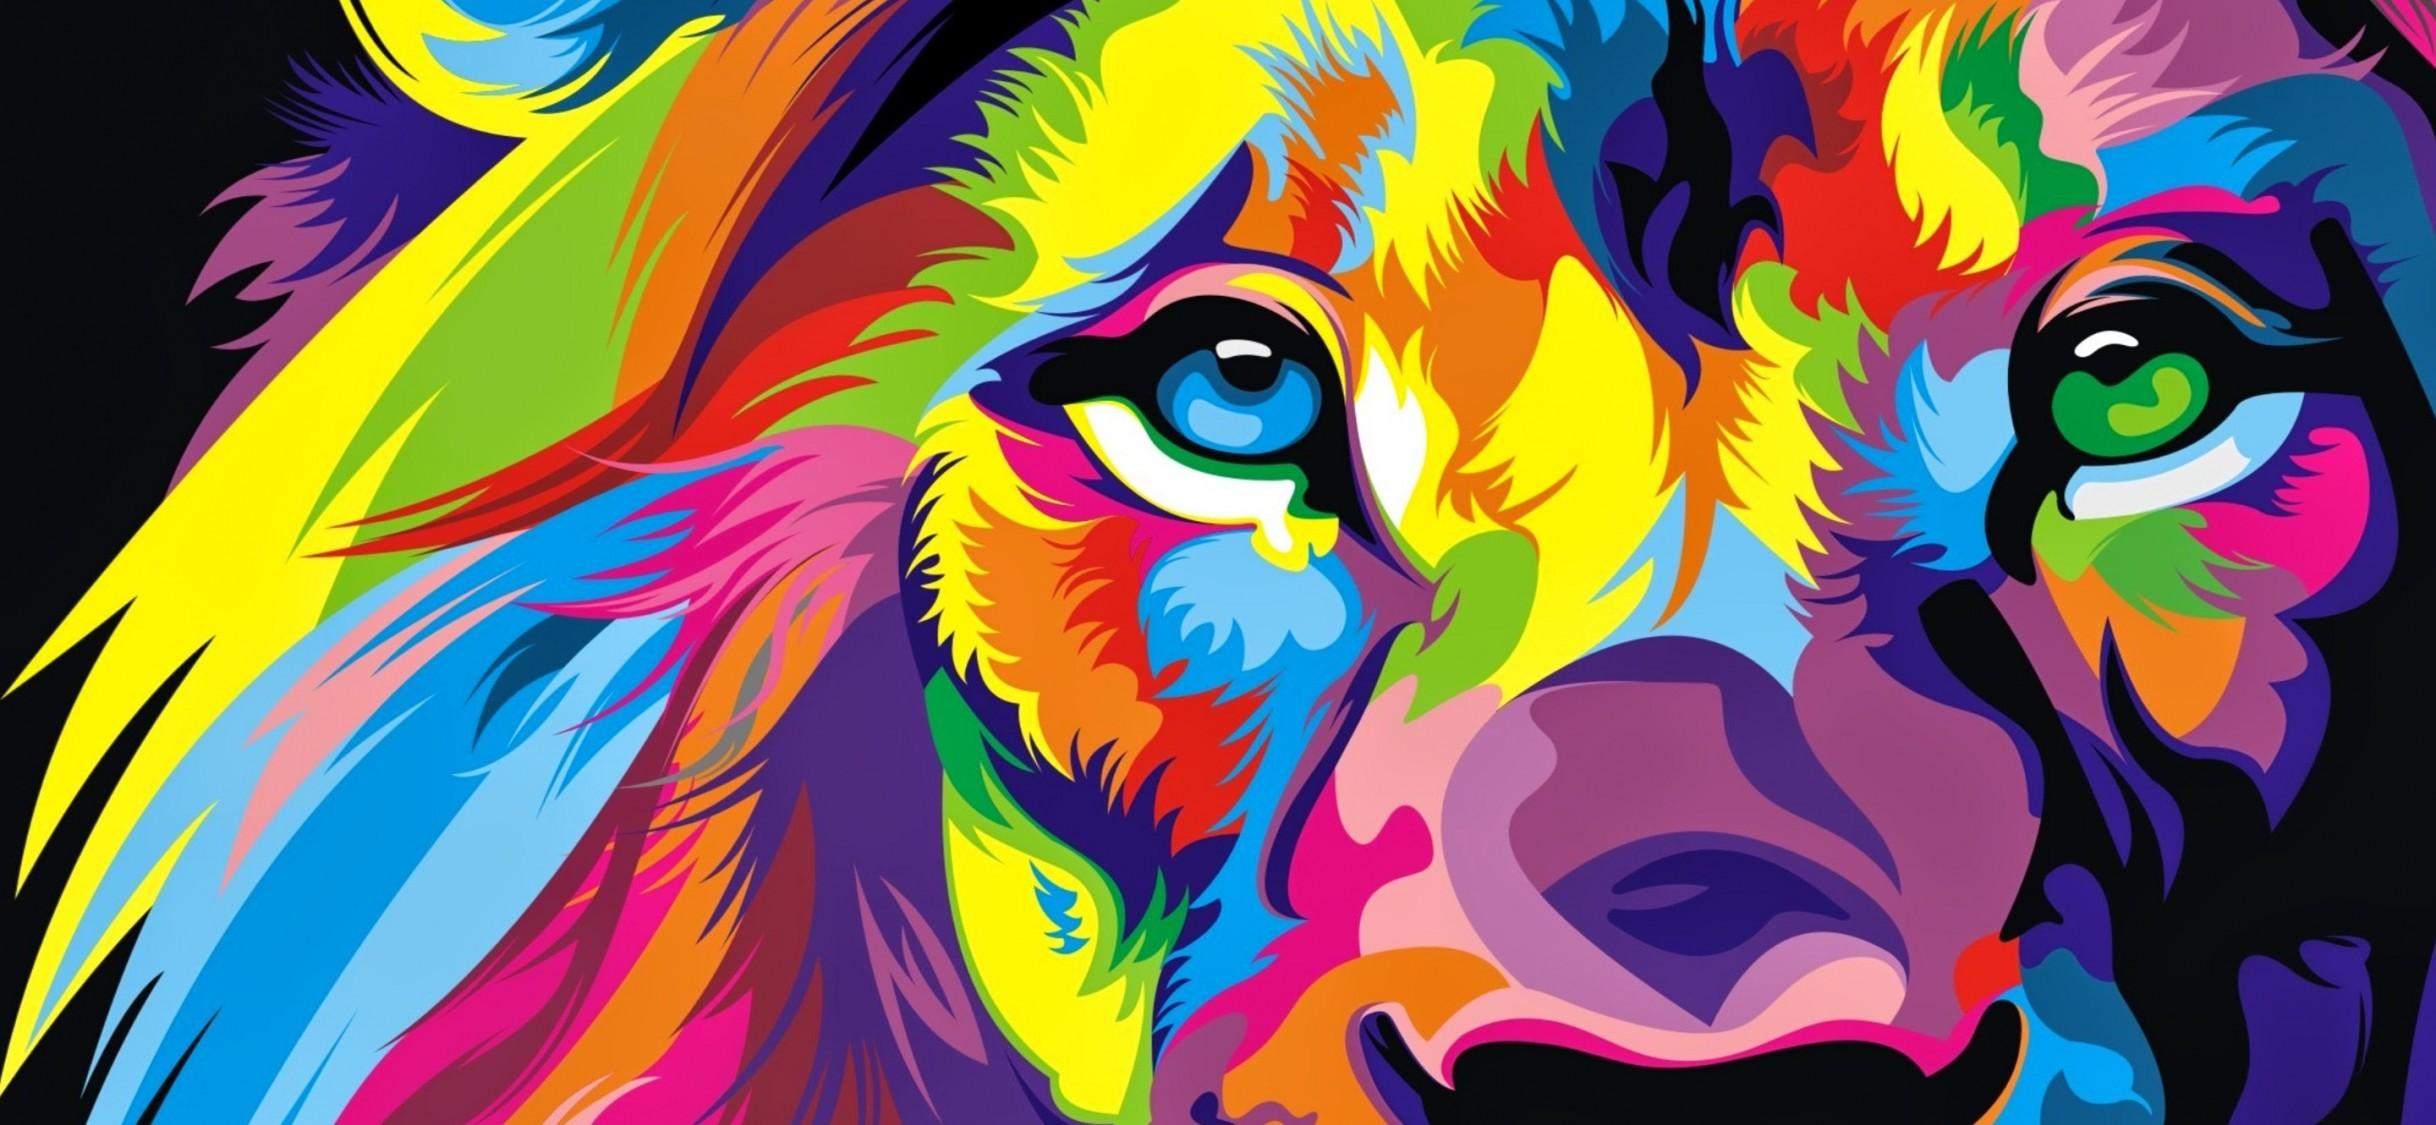 Download Full HD Colourful Lion Artwork Wallpaper iPhone X